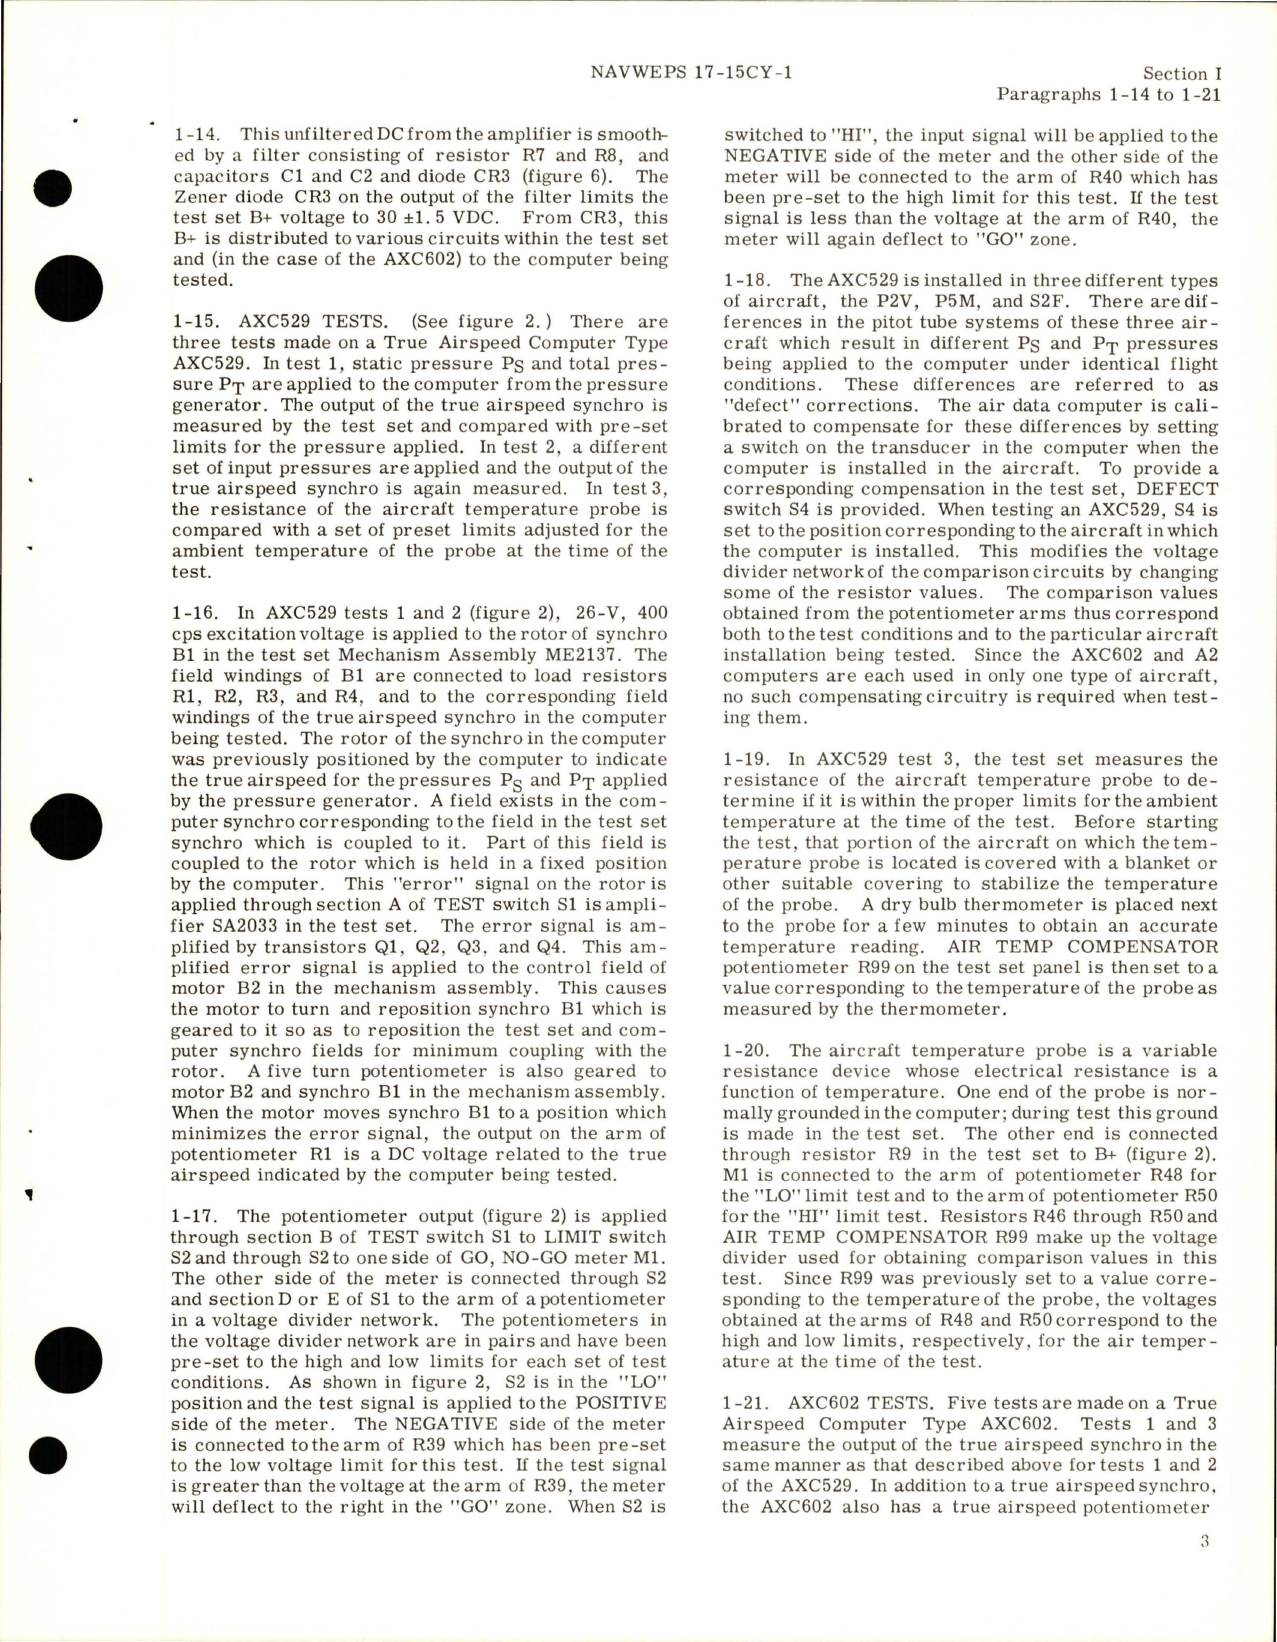 Sample page 7 from AirCorps Library document: Operation and Service Instructions with Illustrated Parts for True Airspeed Computer Test Set - Type WS2061 - Part 817306